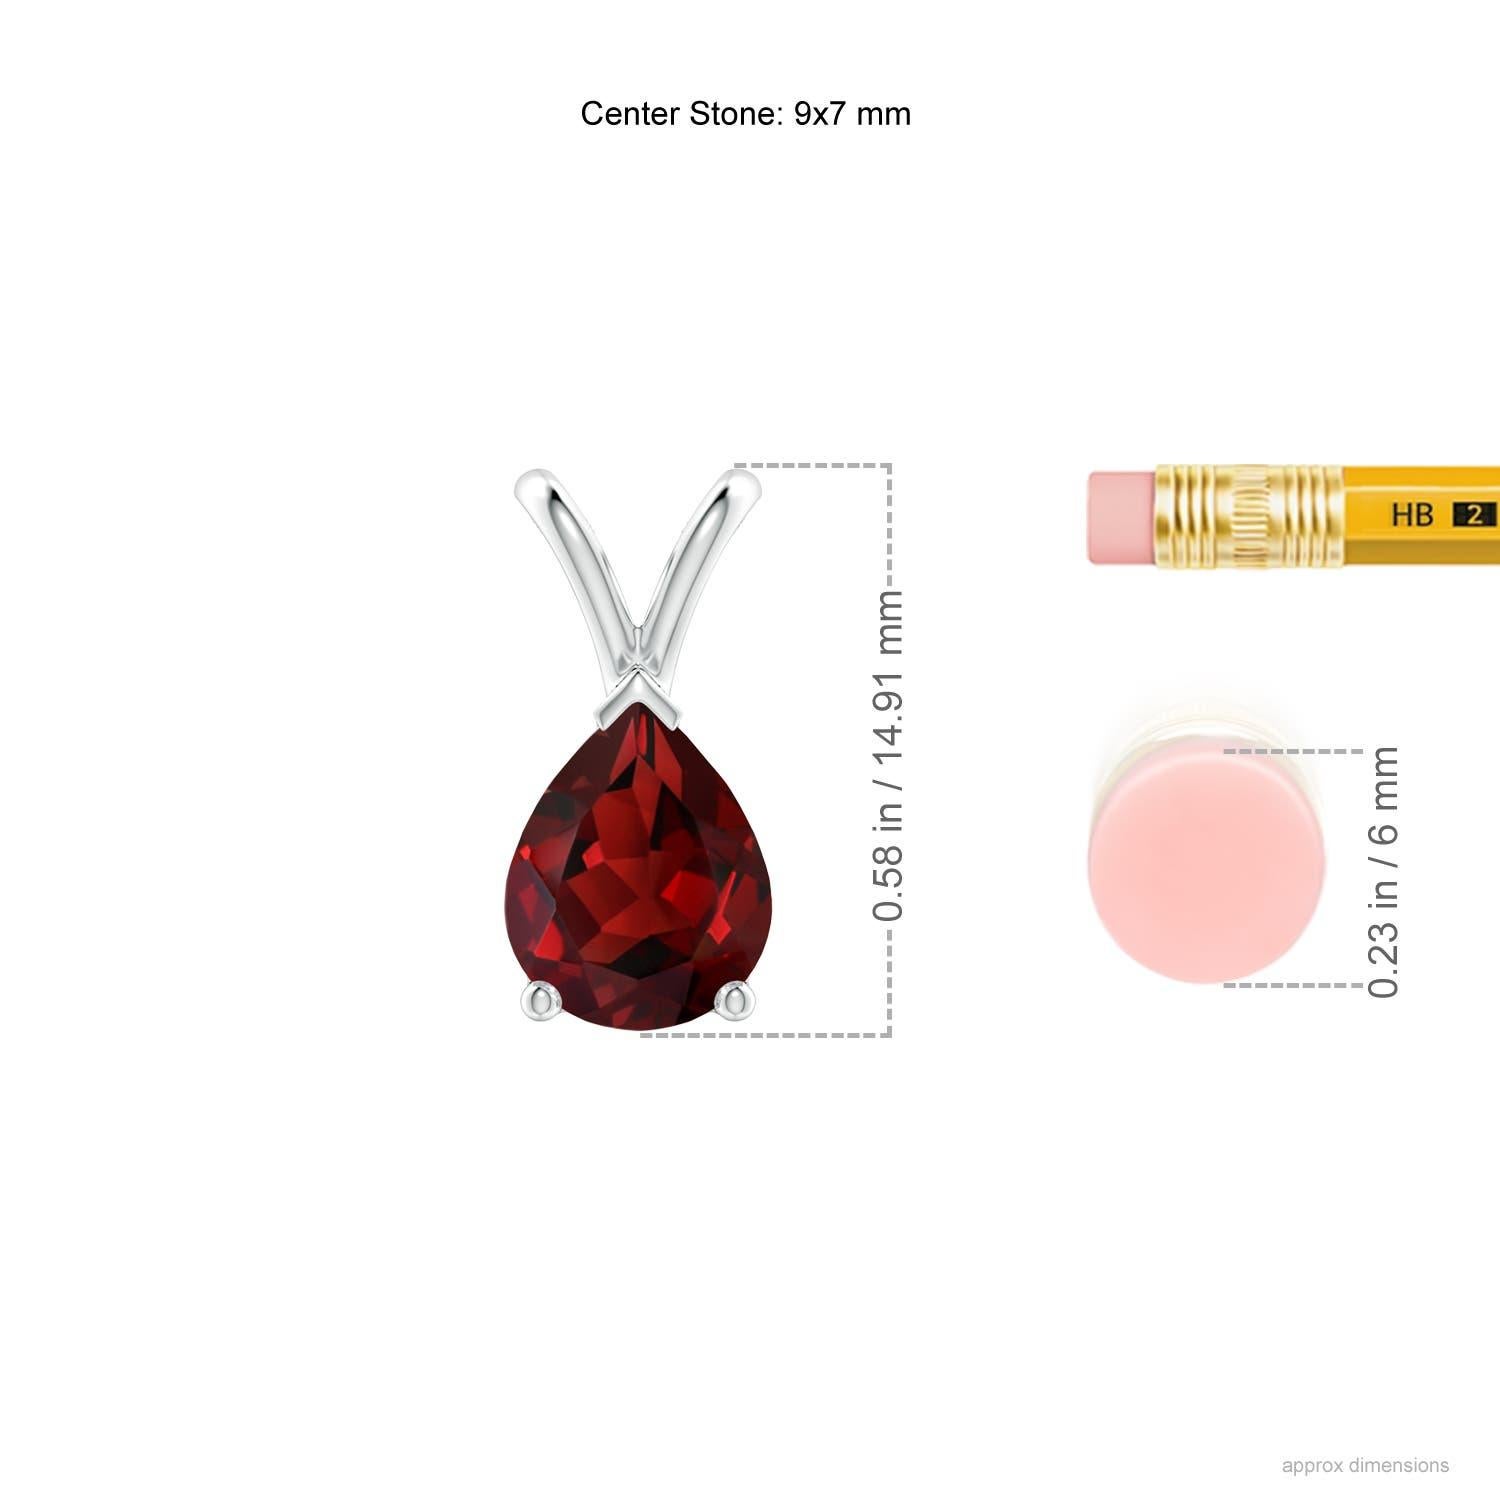 This 14k white gold classic solitaire garnet pendant looks elegant in its minimalistic design. Linked to a shiny v-bale, the magnificent pear-shaped garnet captivates with its intense red hue. The three-prong setting of the gem showcases its